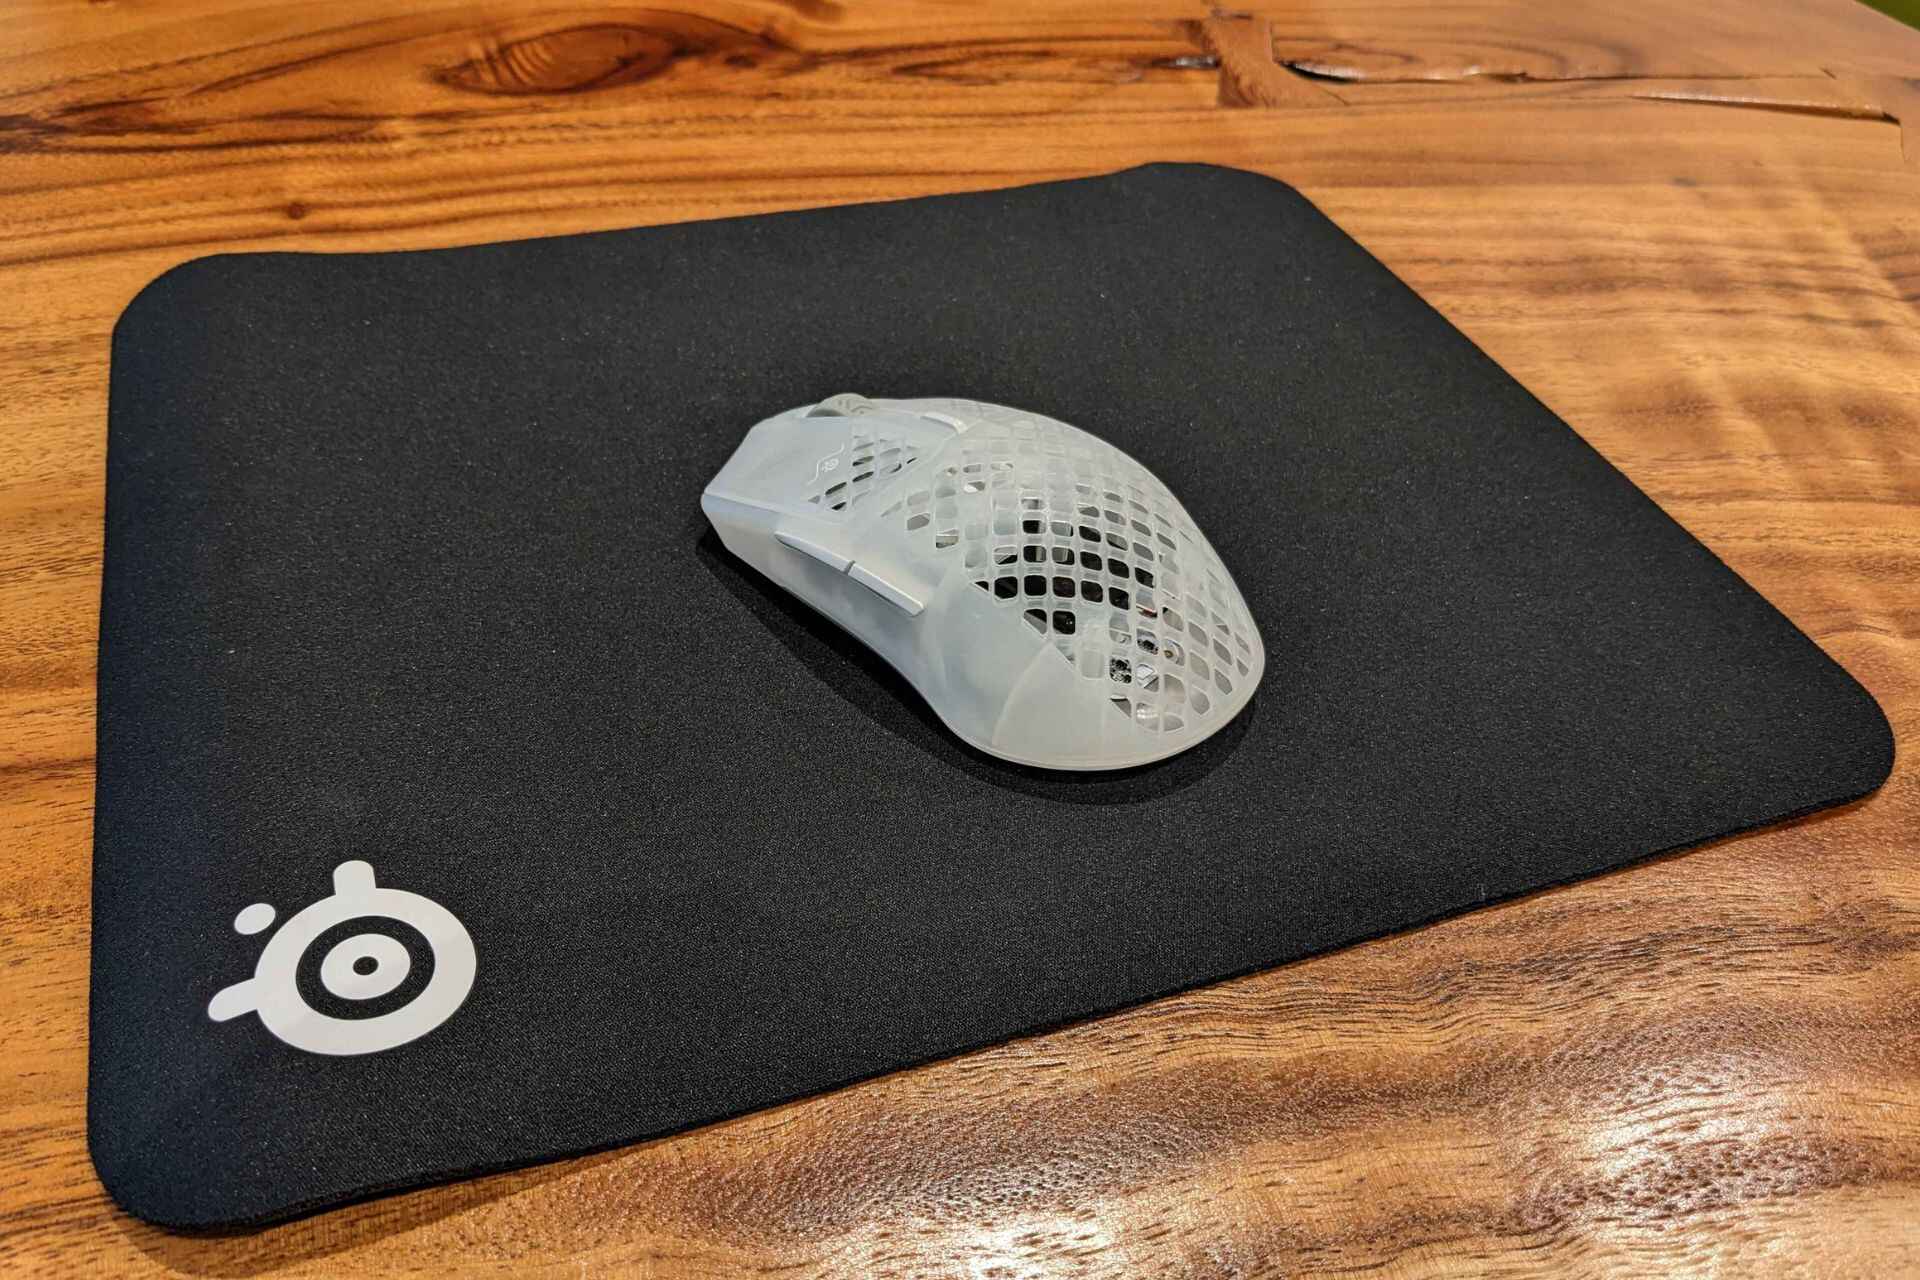 What Should You Look For In A Gaming Mouse Pad?